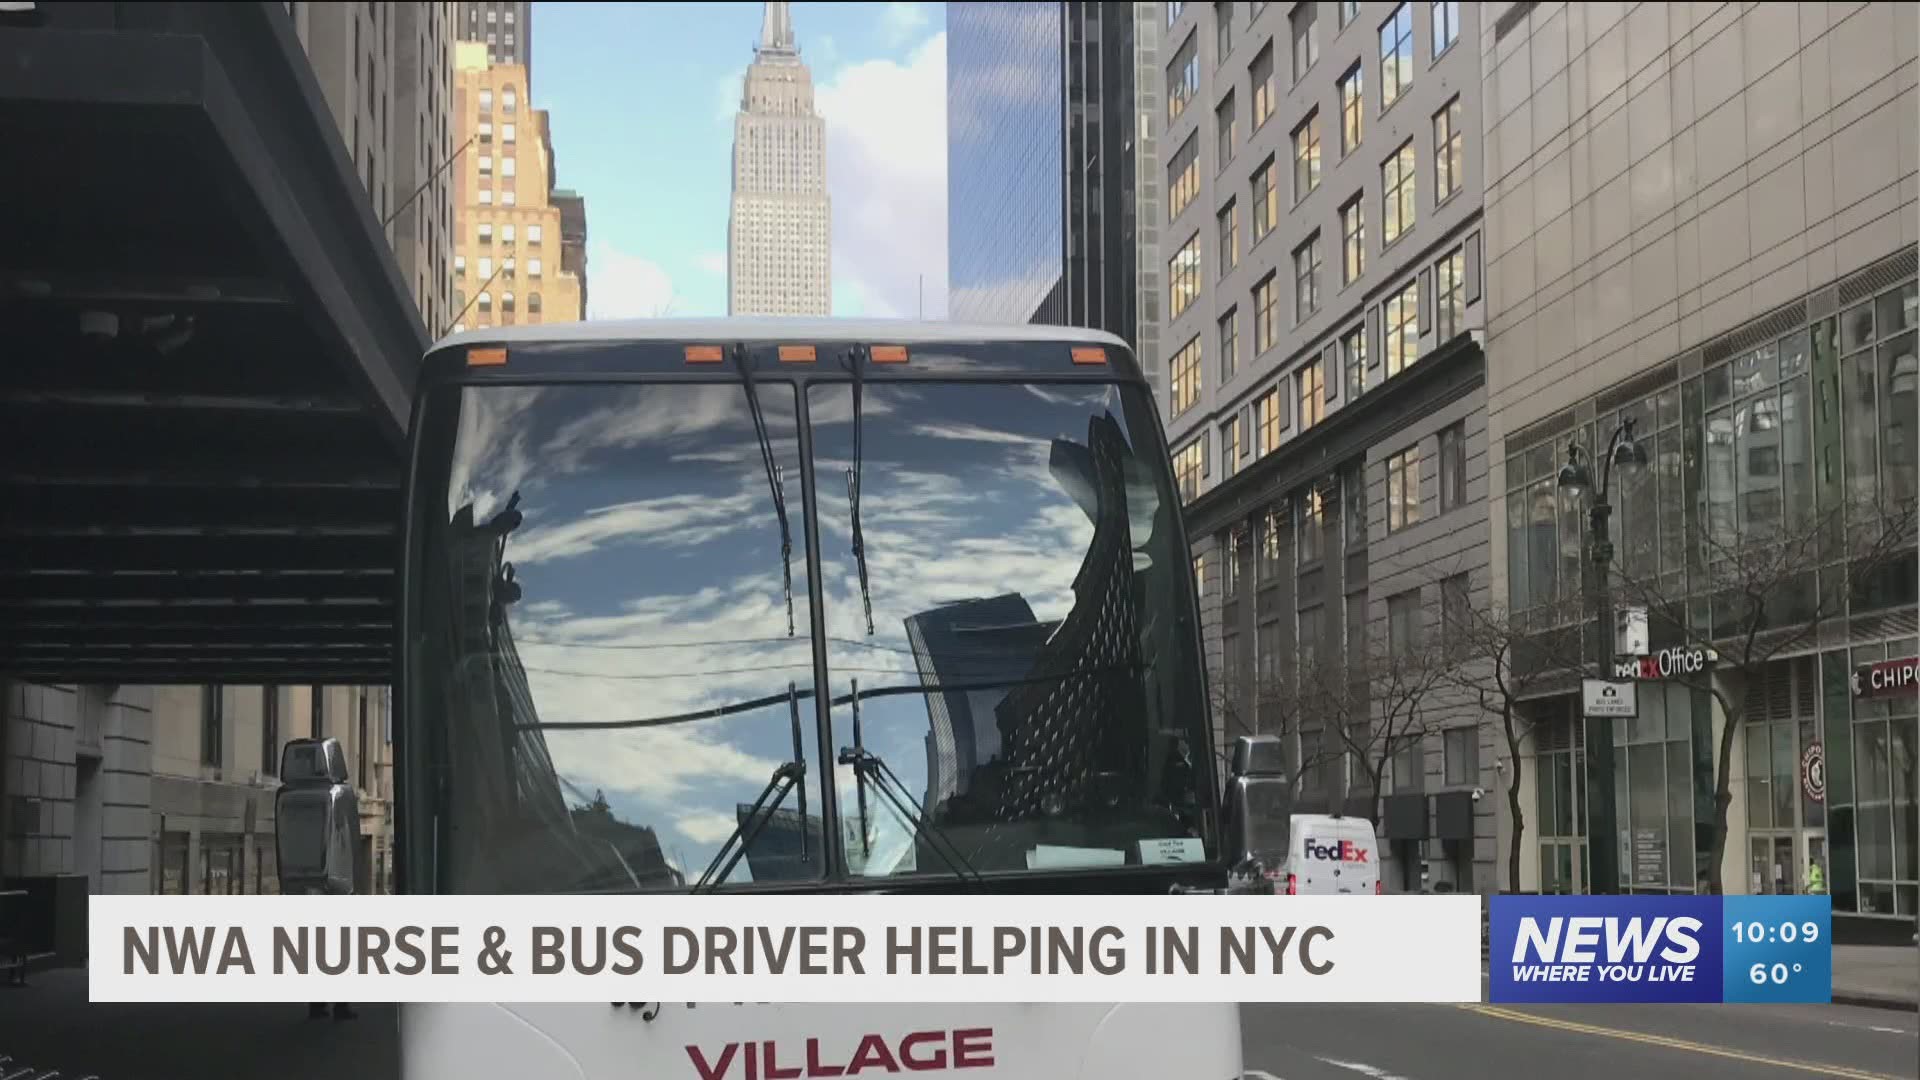 NWA nurse and bus driver helping in NYC during COVID-19